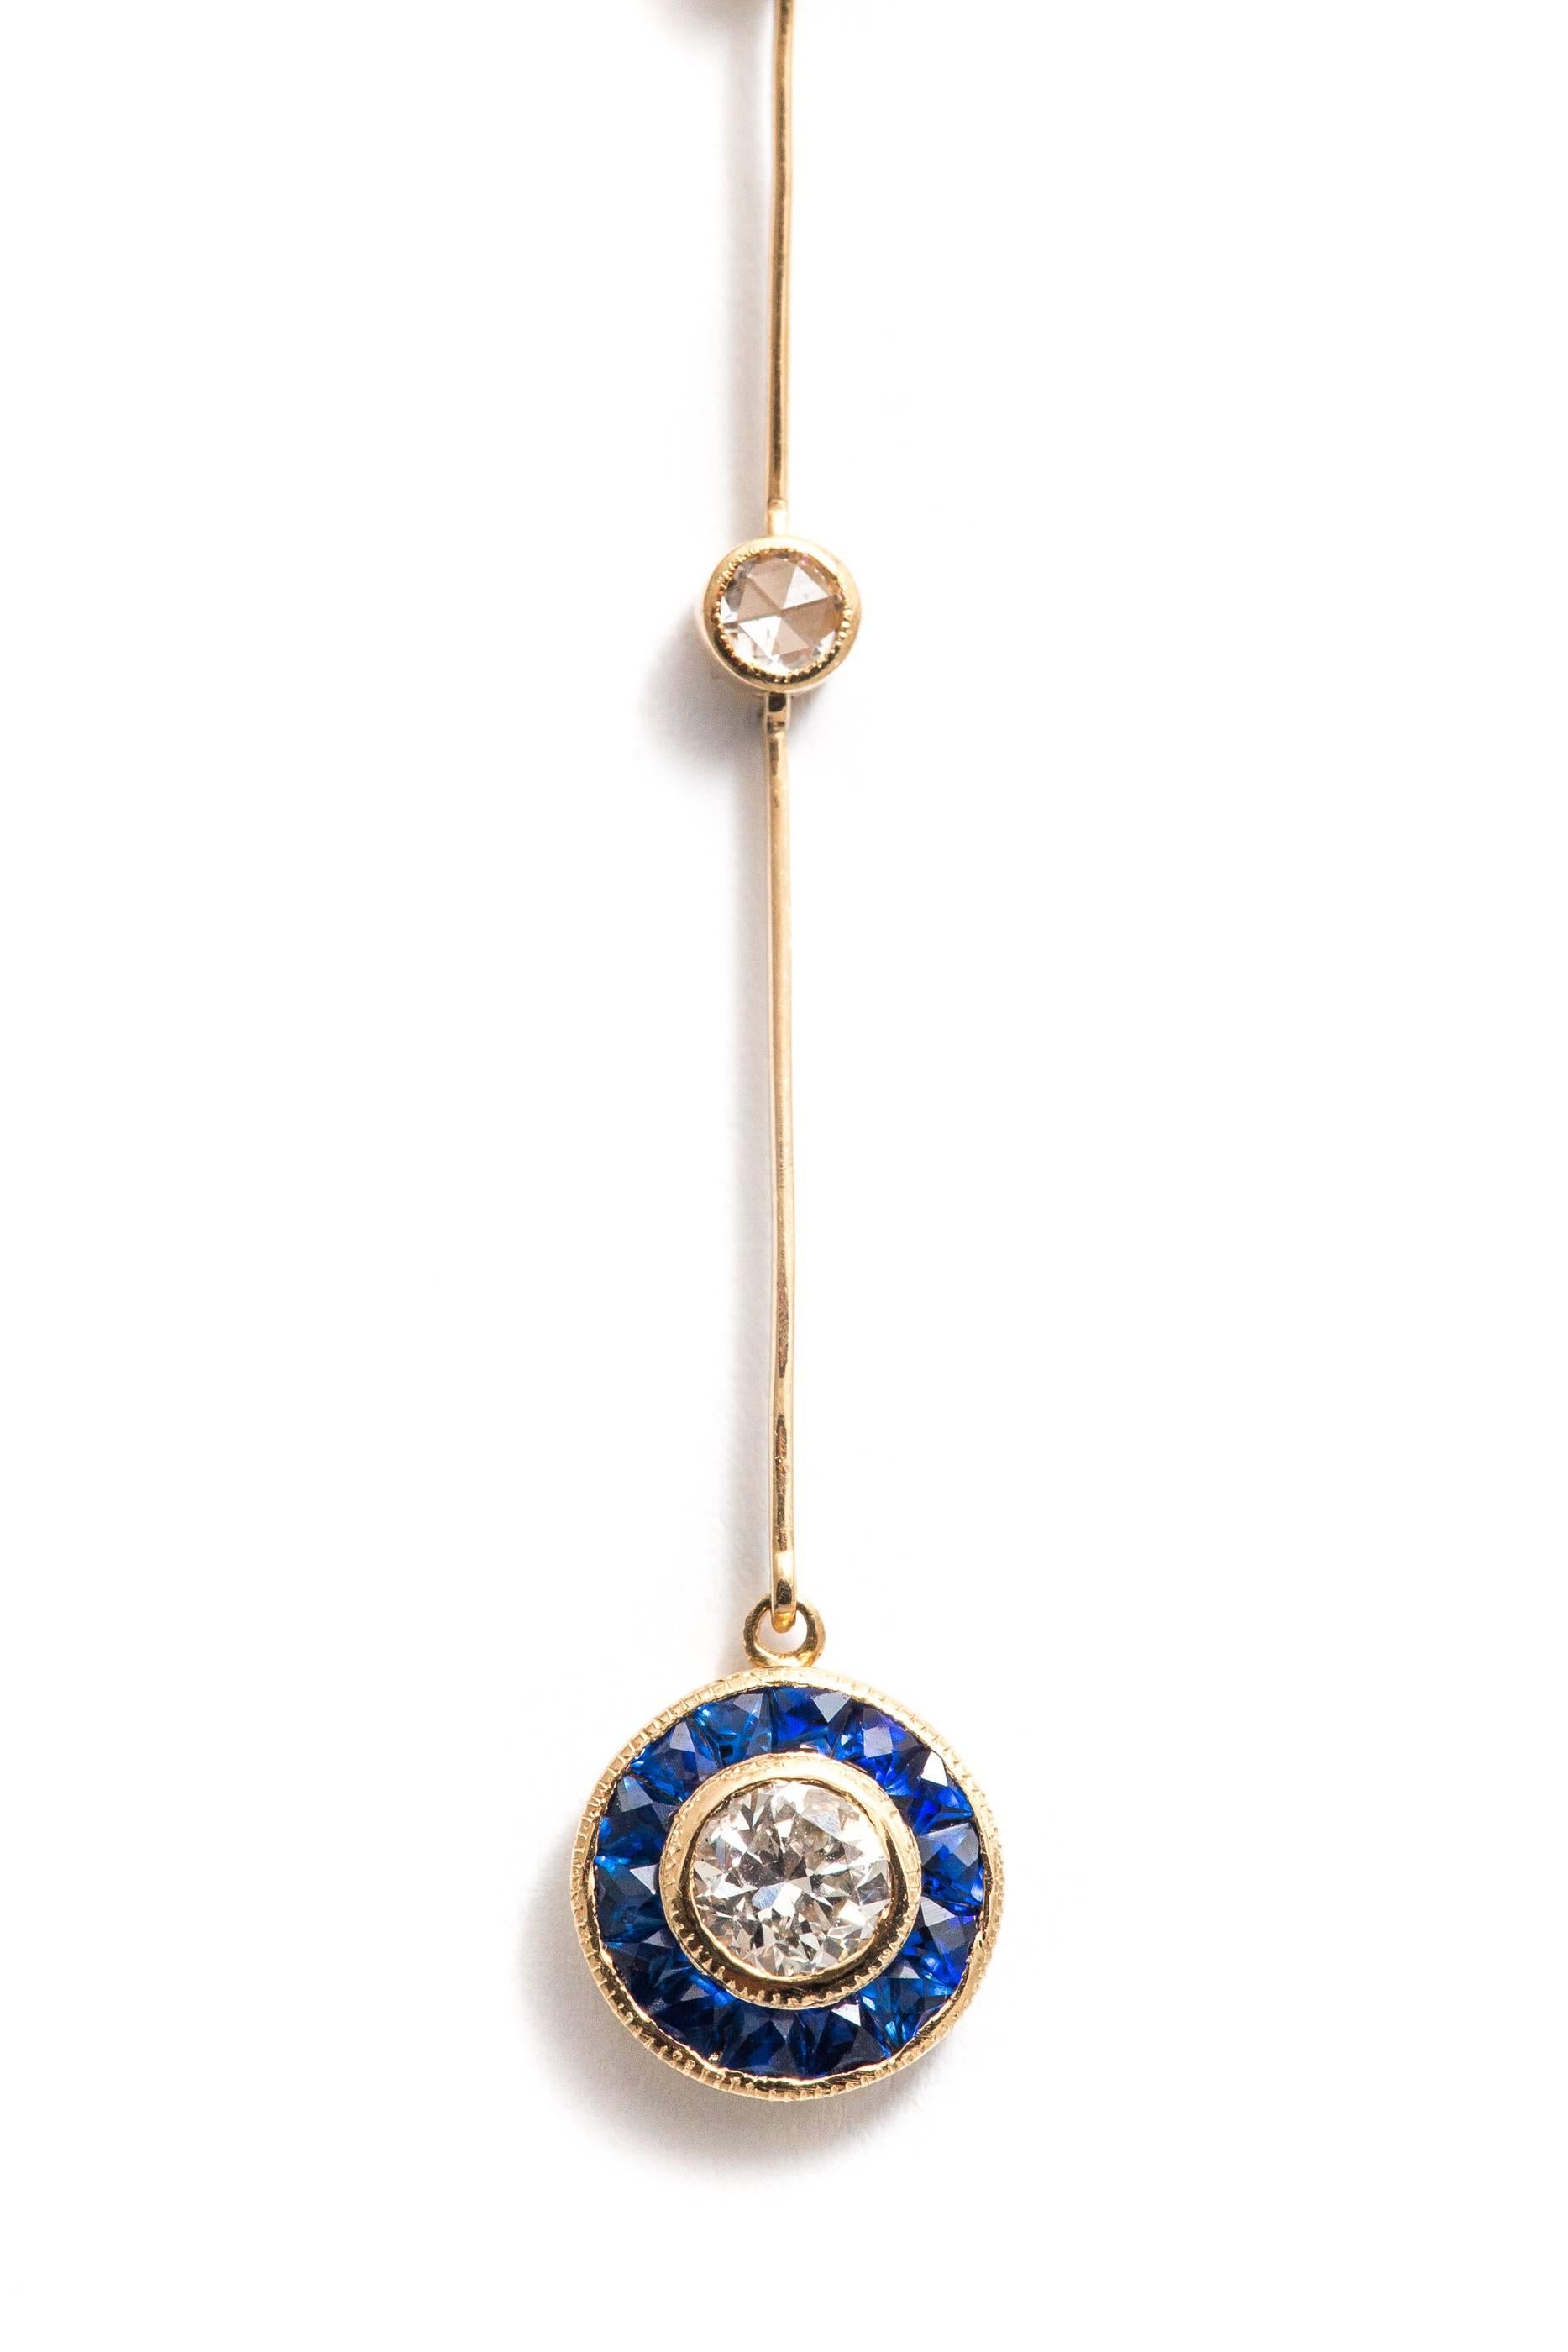 Exquisite French Cut Sapphire Diamond Yellow Gold Drop Necklace In Excellent Condition For Sale In Boston, MA